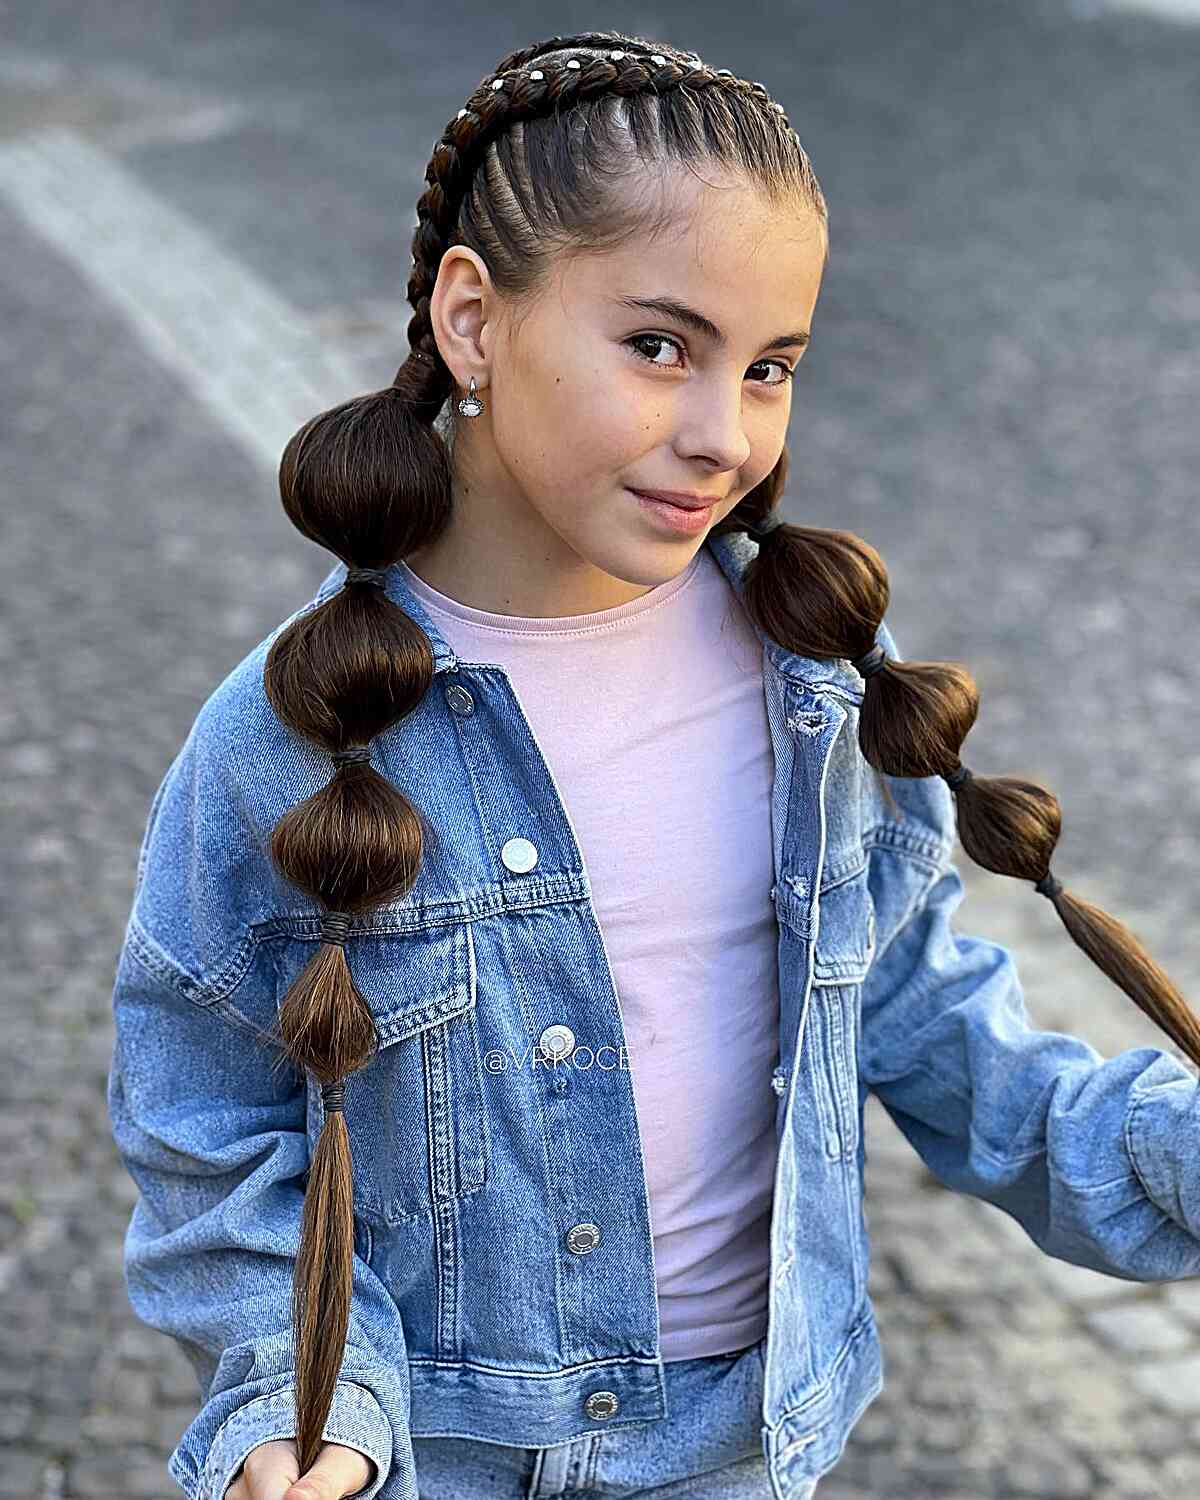 Bubble Braided Pigtails for Little Girls